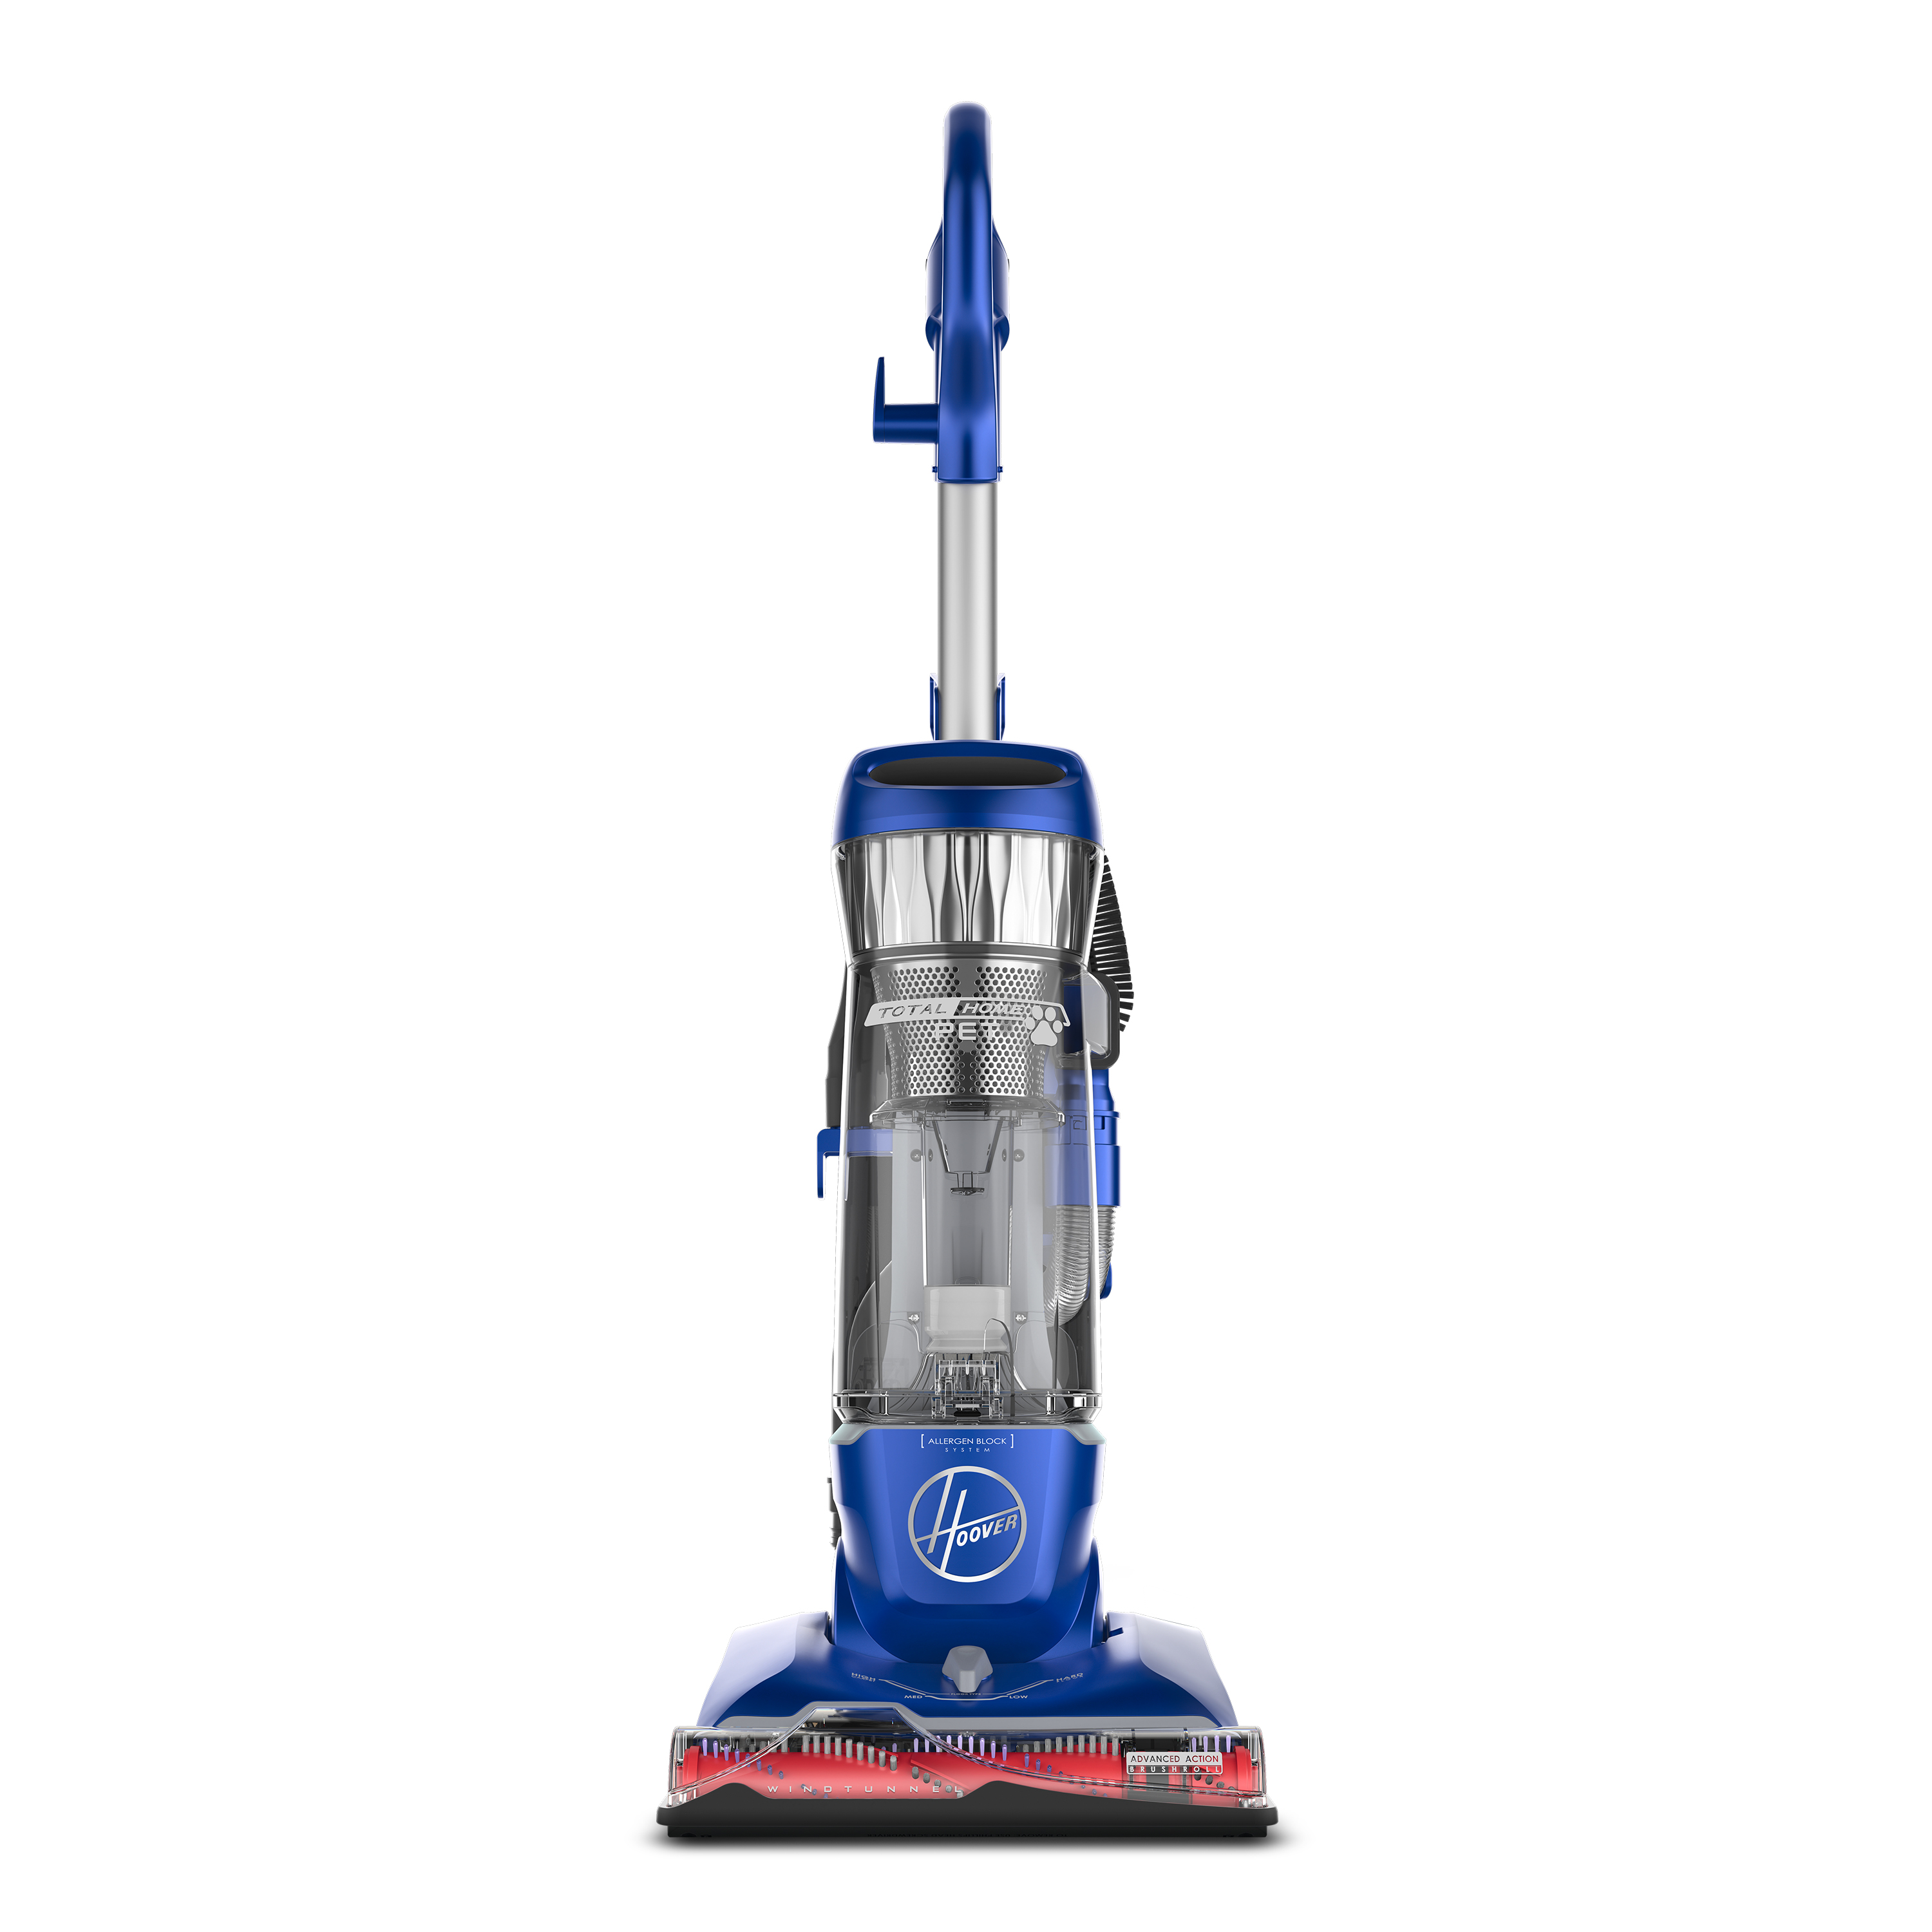 Hoover Total Home Pet Max Life Bagless Upright Vacuum Cleaner, UH74100, New Condition - image 1 of 13